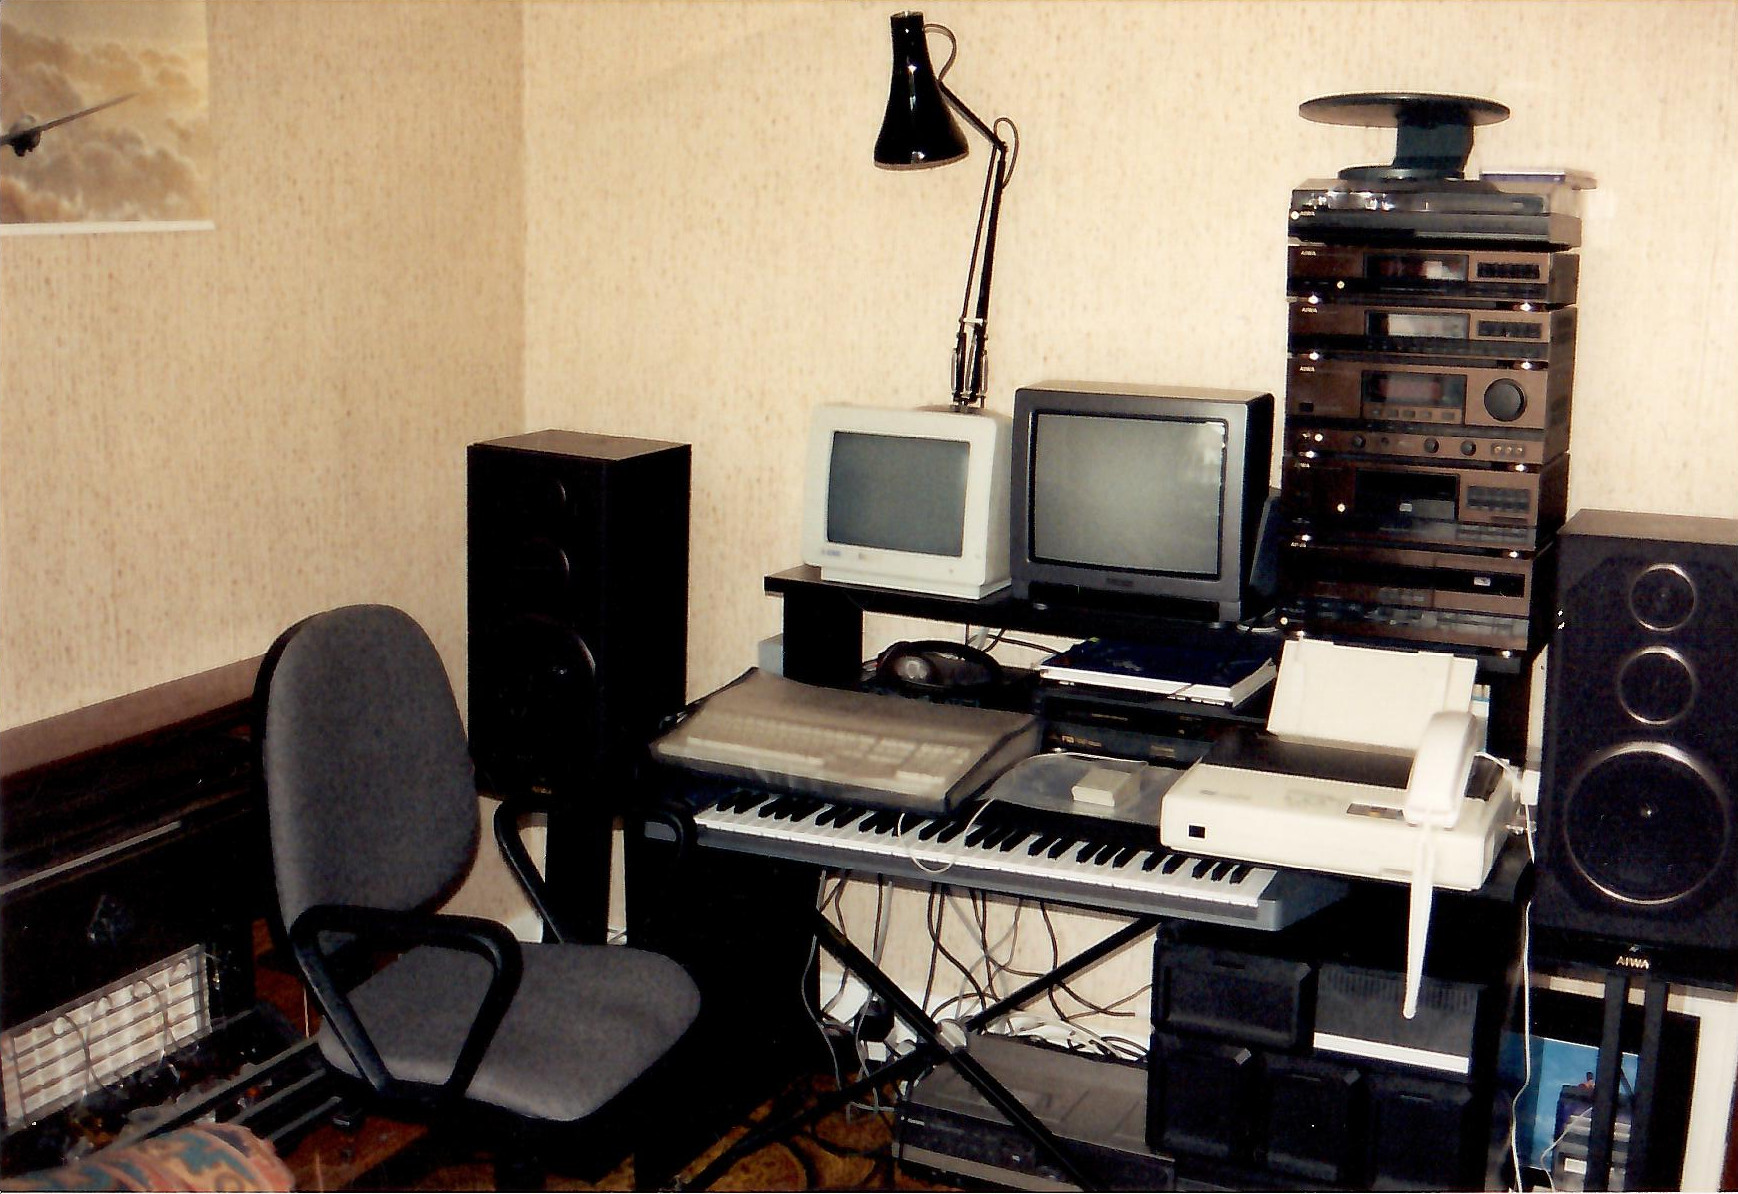 A photo of my computer setup from 1993